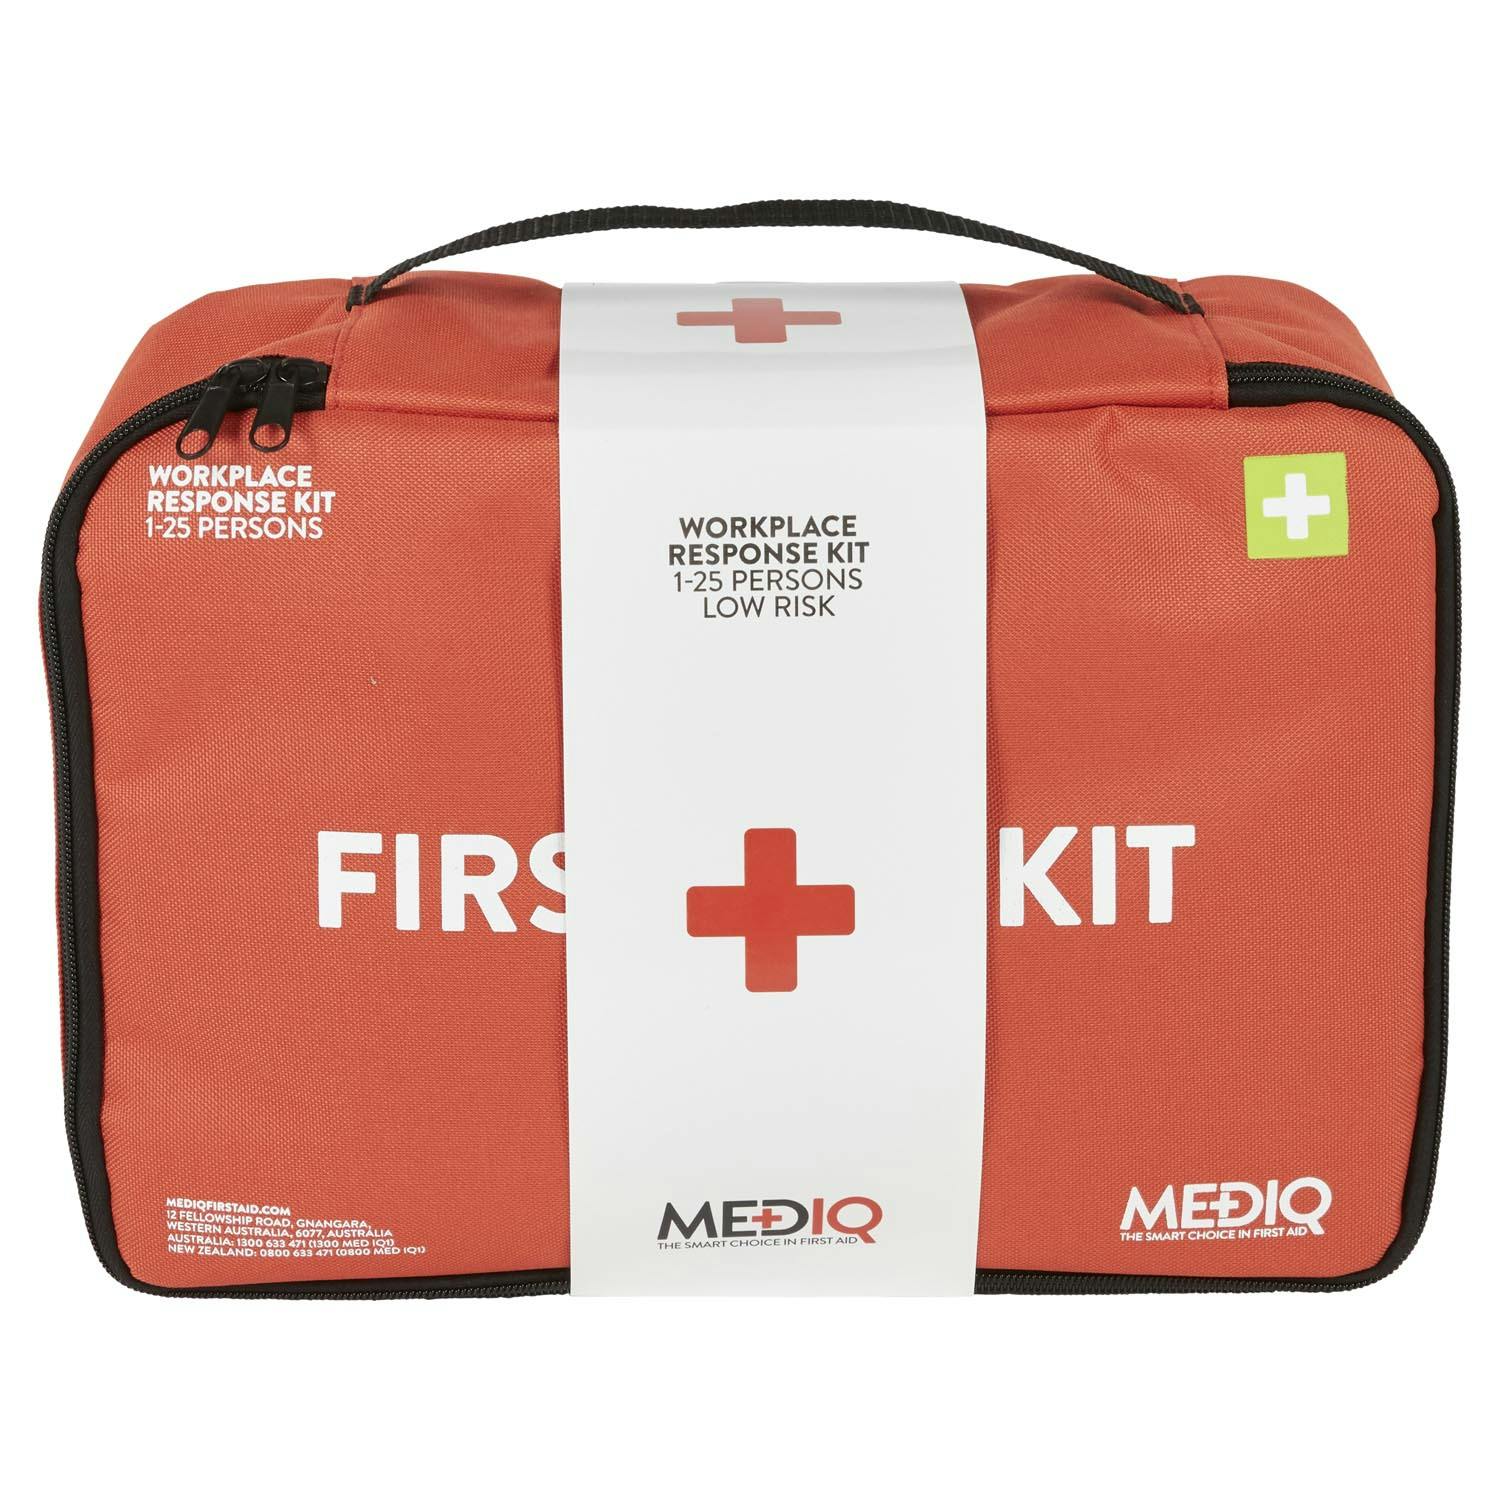 MEDIQ Essential Workplace Response First Aid Kit In Soft Pack